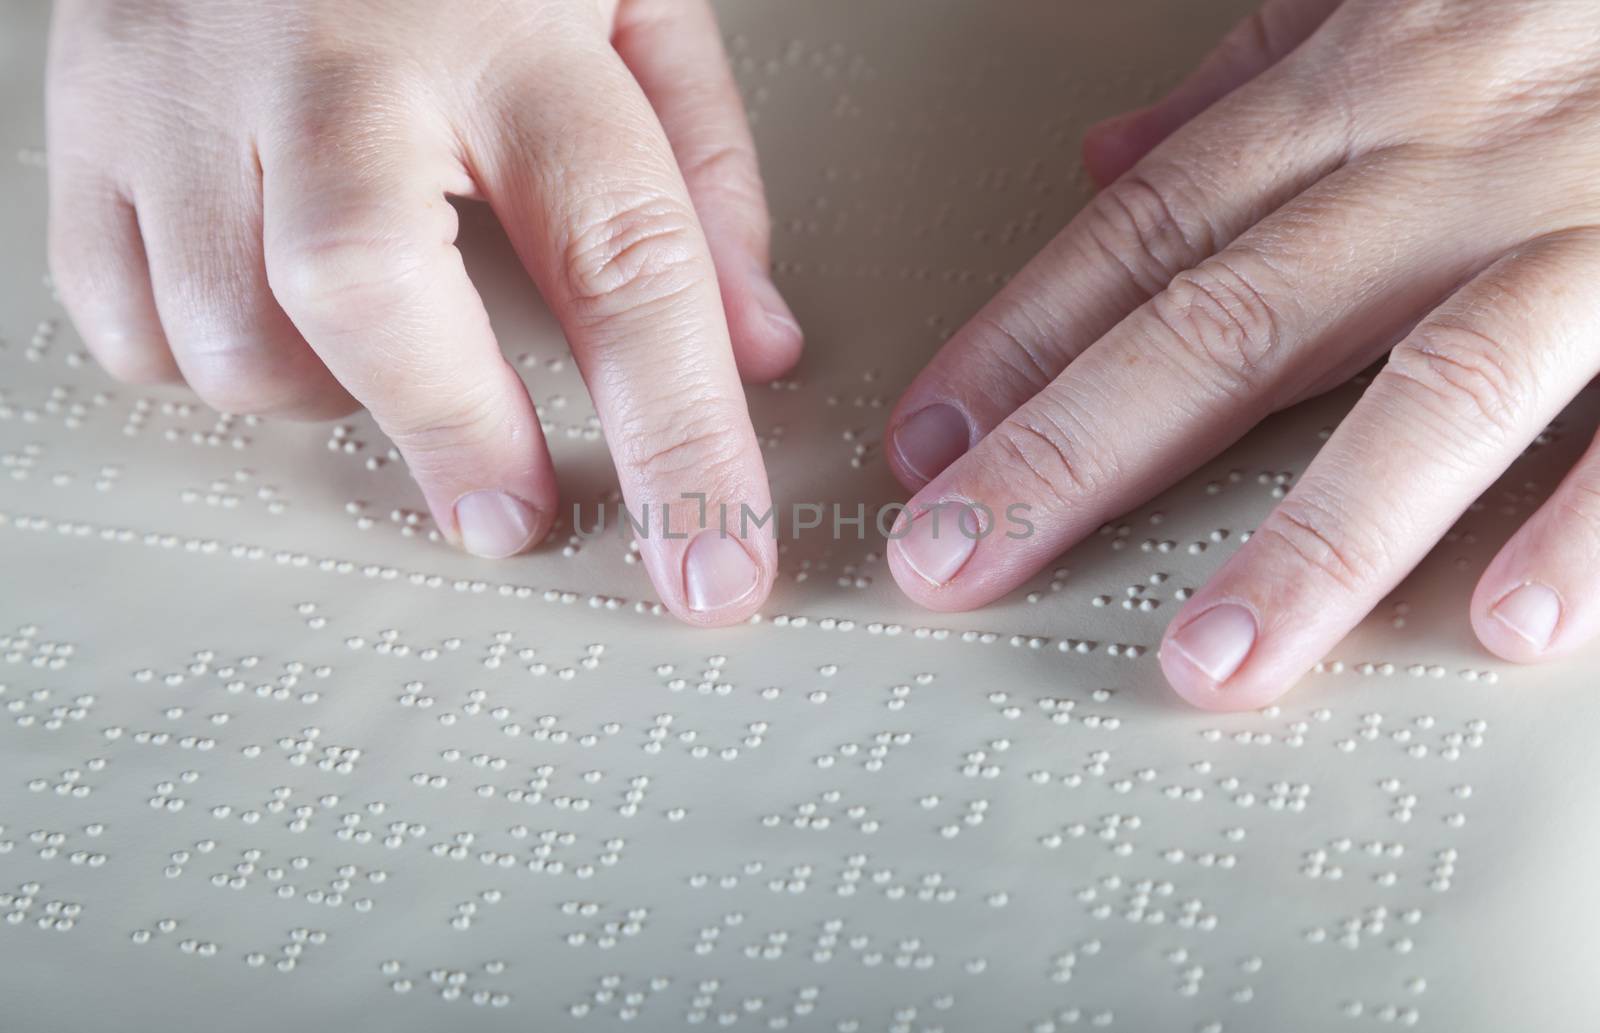 Braille method of reading by Portokalis